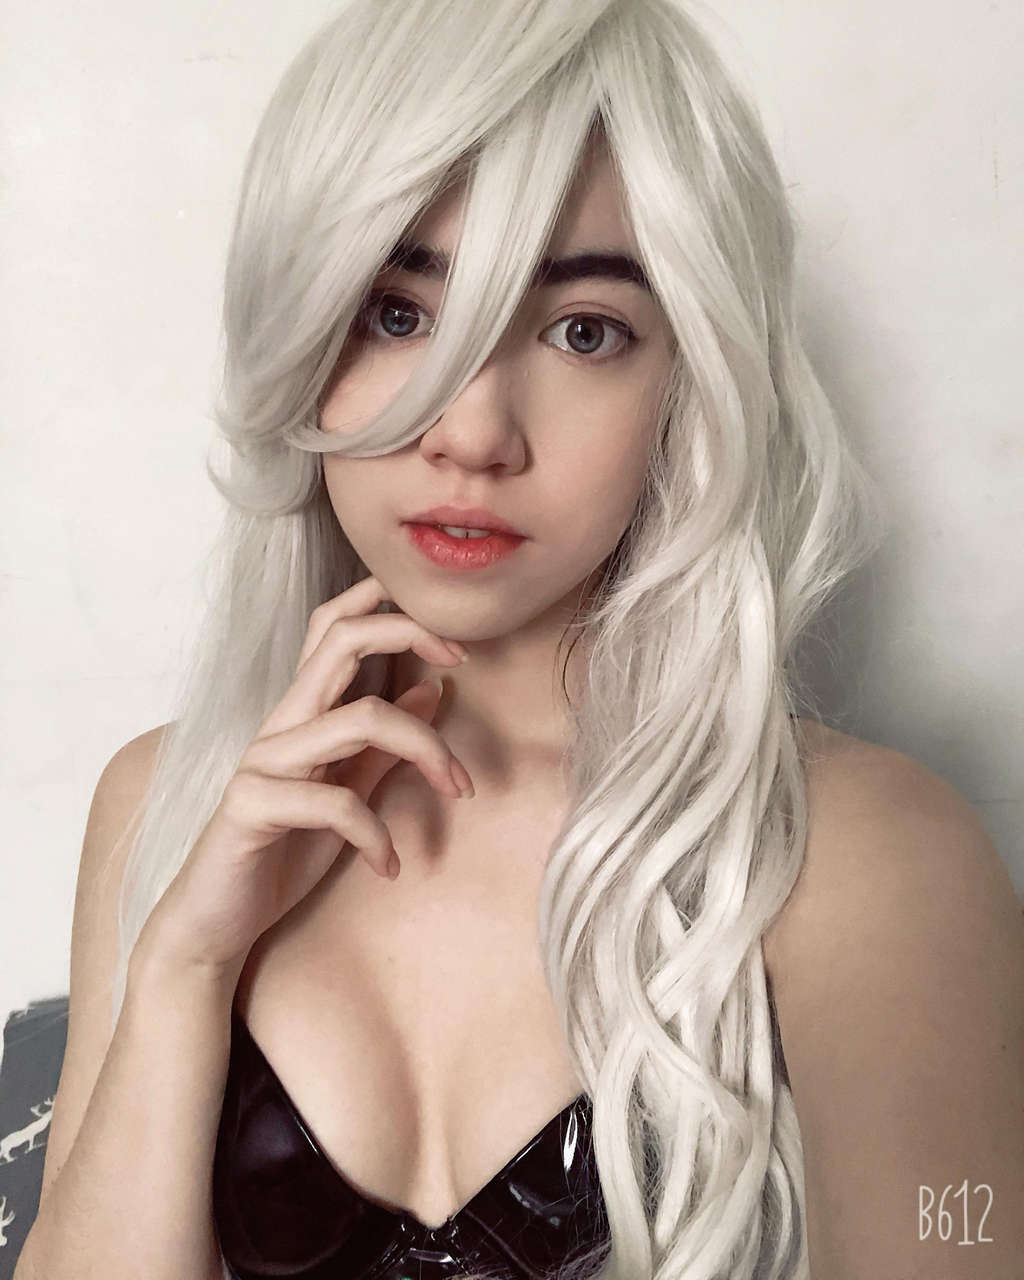 A2 Nier Automata By Lolibunny Cosplay Costest Selfie By M